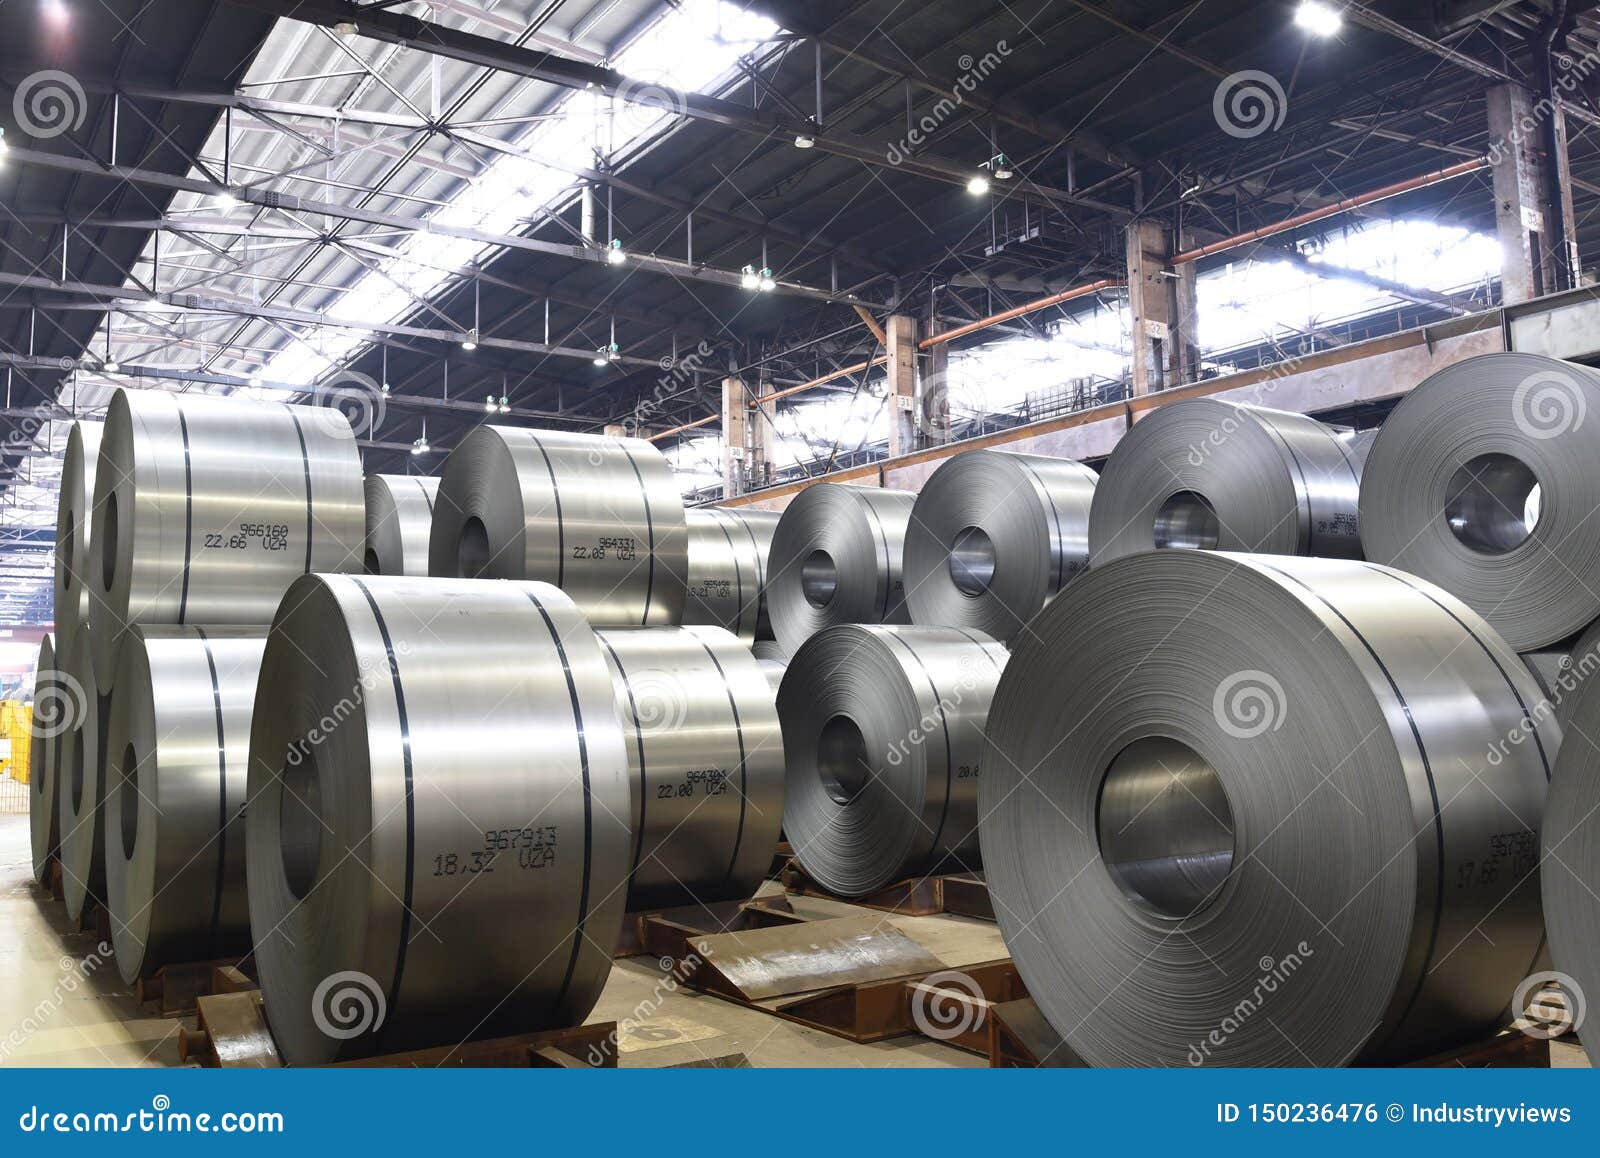 Industrial Plant For The Production Of Sheet Metal In A Steel Mill Storage Of Sheet Rolls